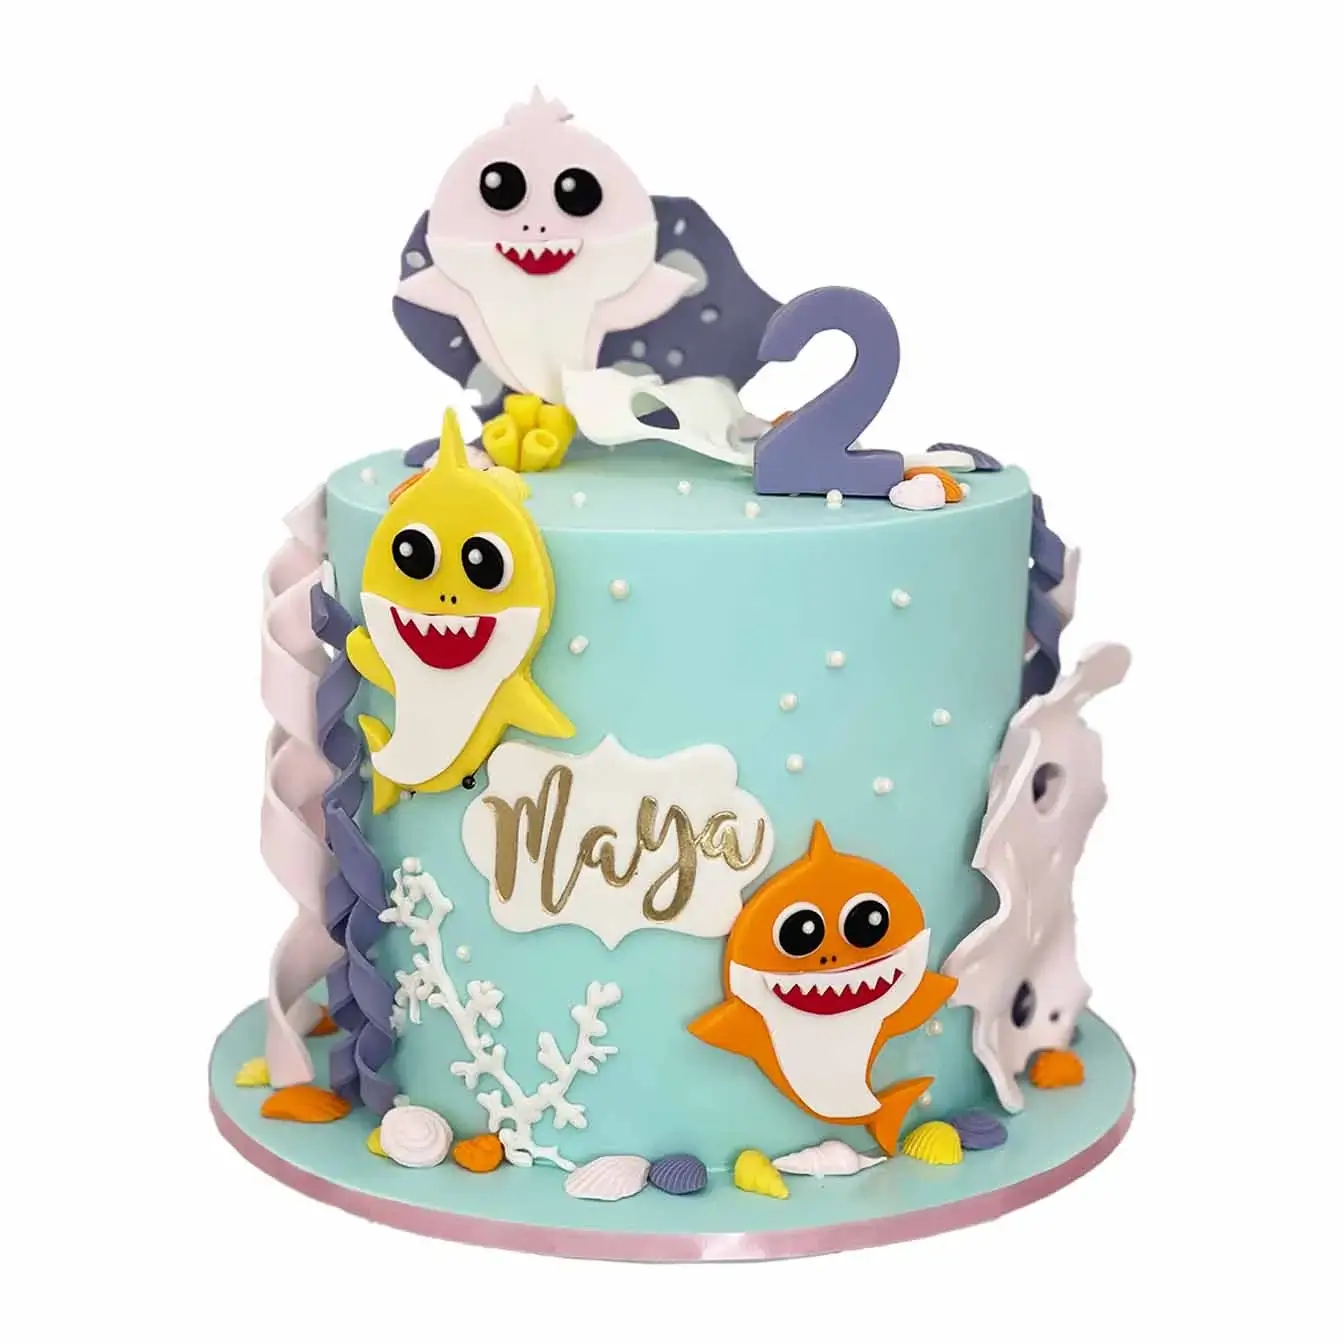 Baby Shark Underwater Adventure Cake - A teal fondant-iced cake with cutout baby sharks and under the sea fondant seaweed and shells, a vibrant and playful centerpiece for ocean-themed celebrations.